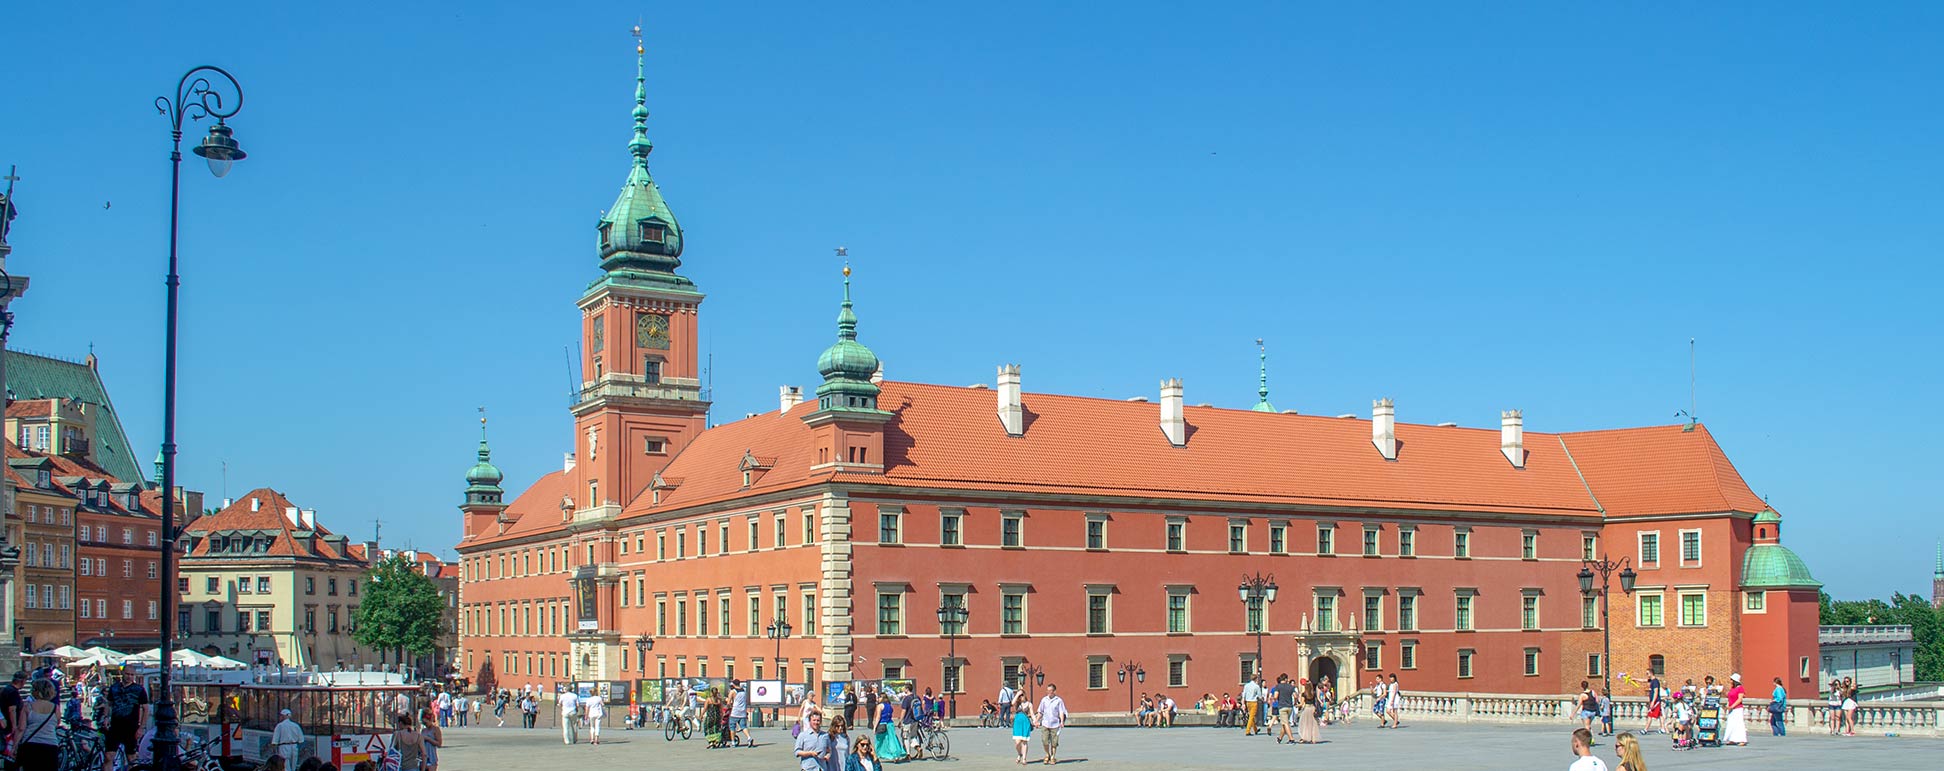 Royal Castle in Warsaw's Old Town